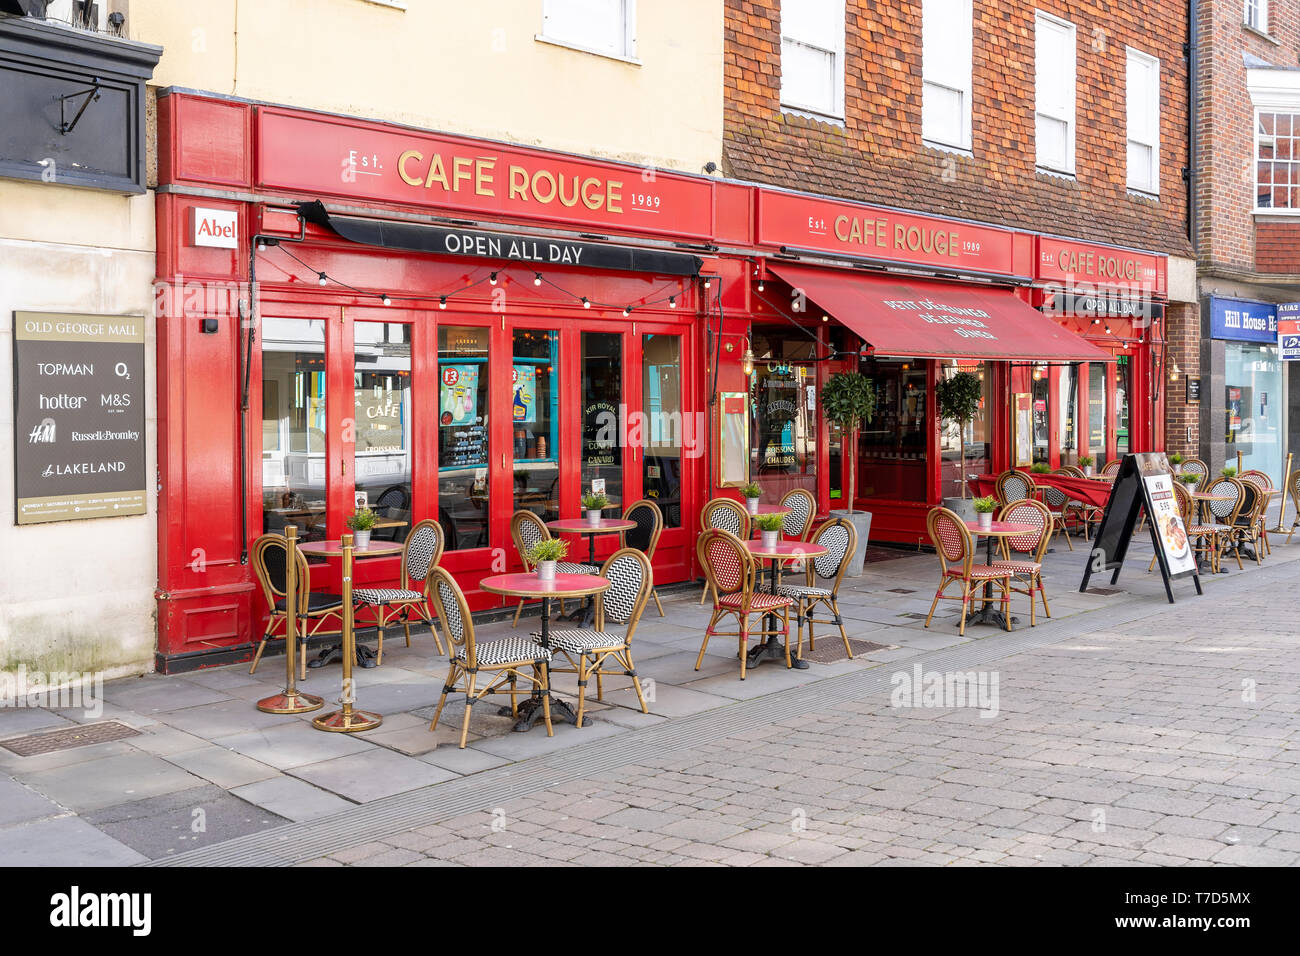 Cafe Rouge restaurant with empty tables and chairs on pavement Stock Photo